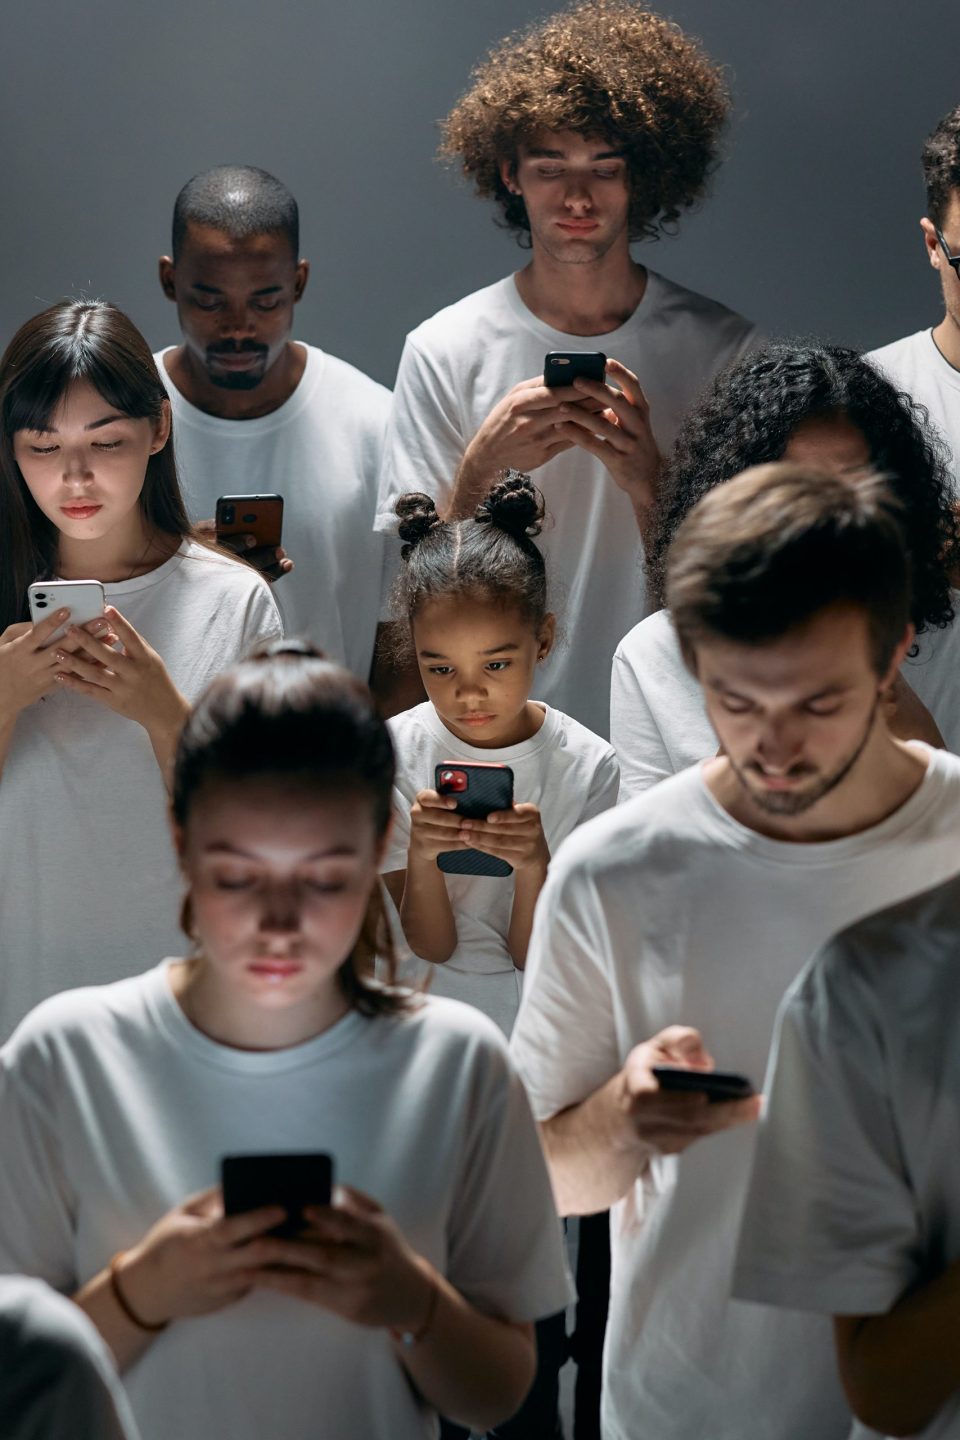 Image of people using mobile